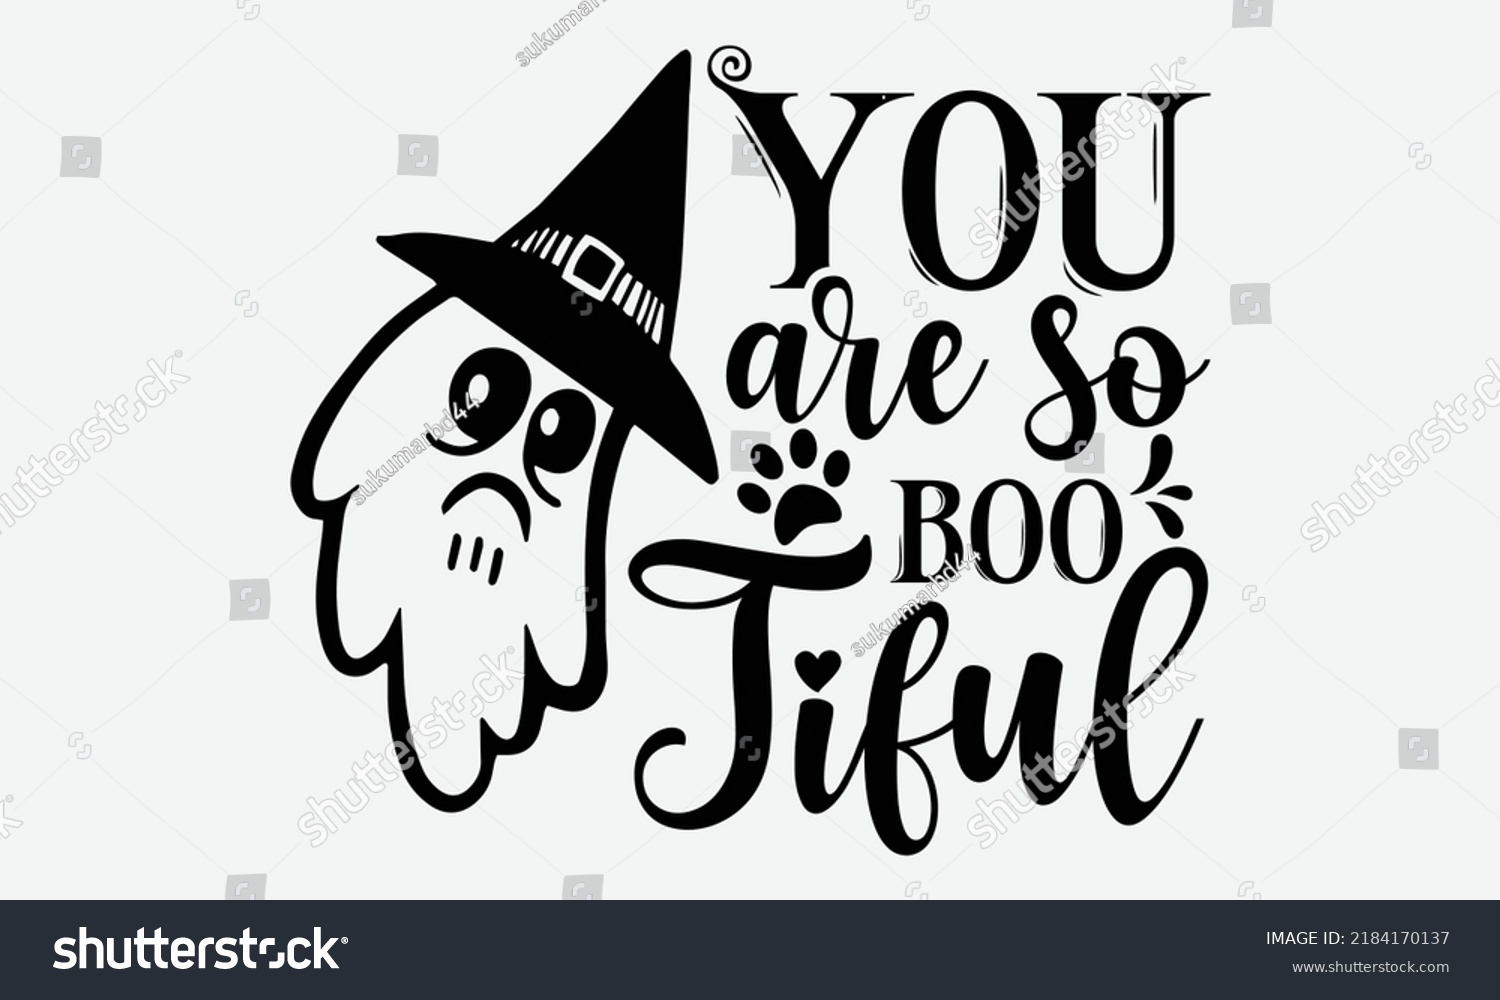 SVG of You Are So Boo-Tiful - Halloween t shirt design, Hand drawn lettering phrase isolated on white background, Calligraphy graphic design typography element, Hand written vector sign, svg svg